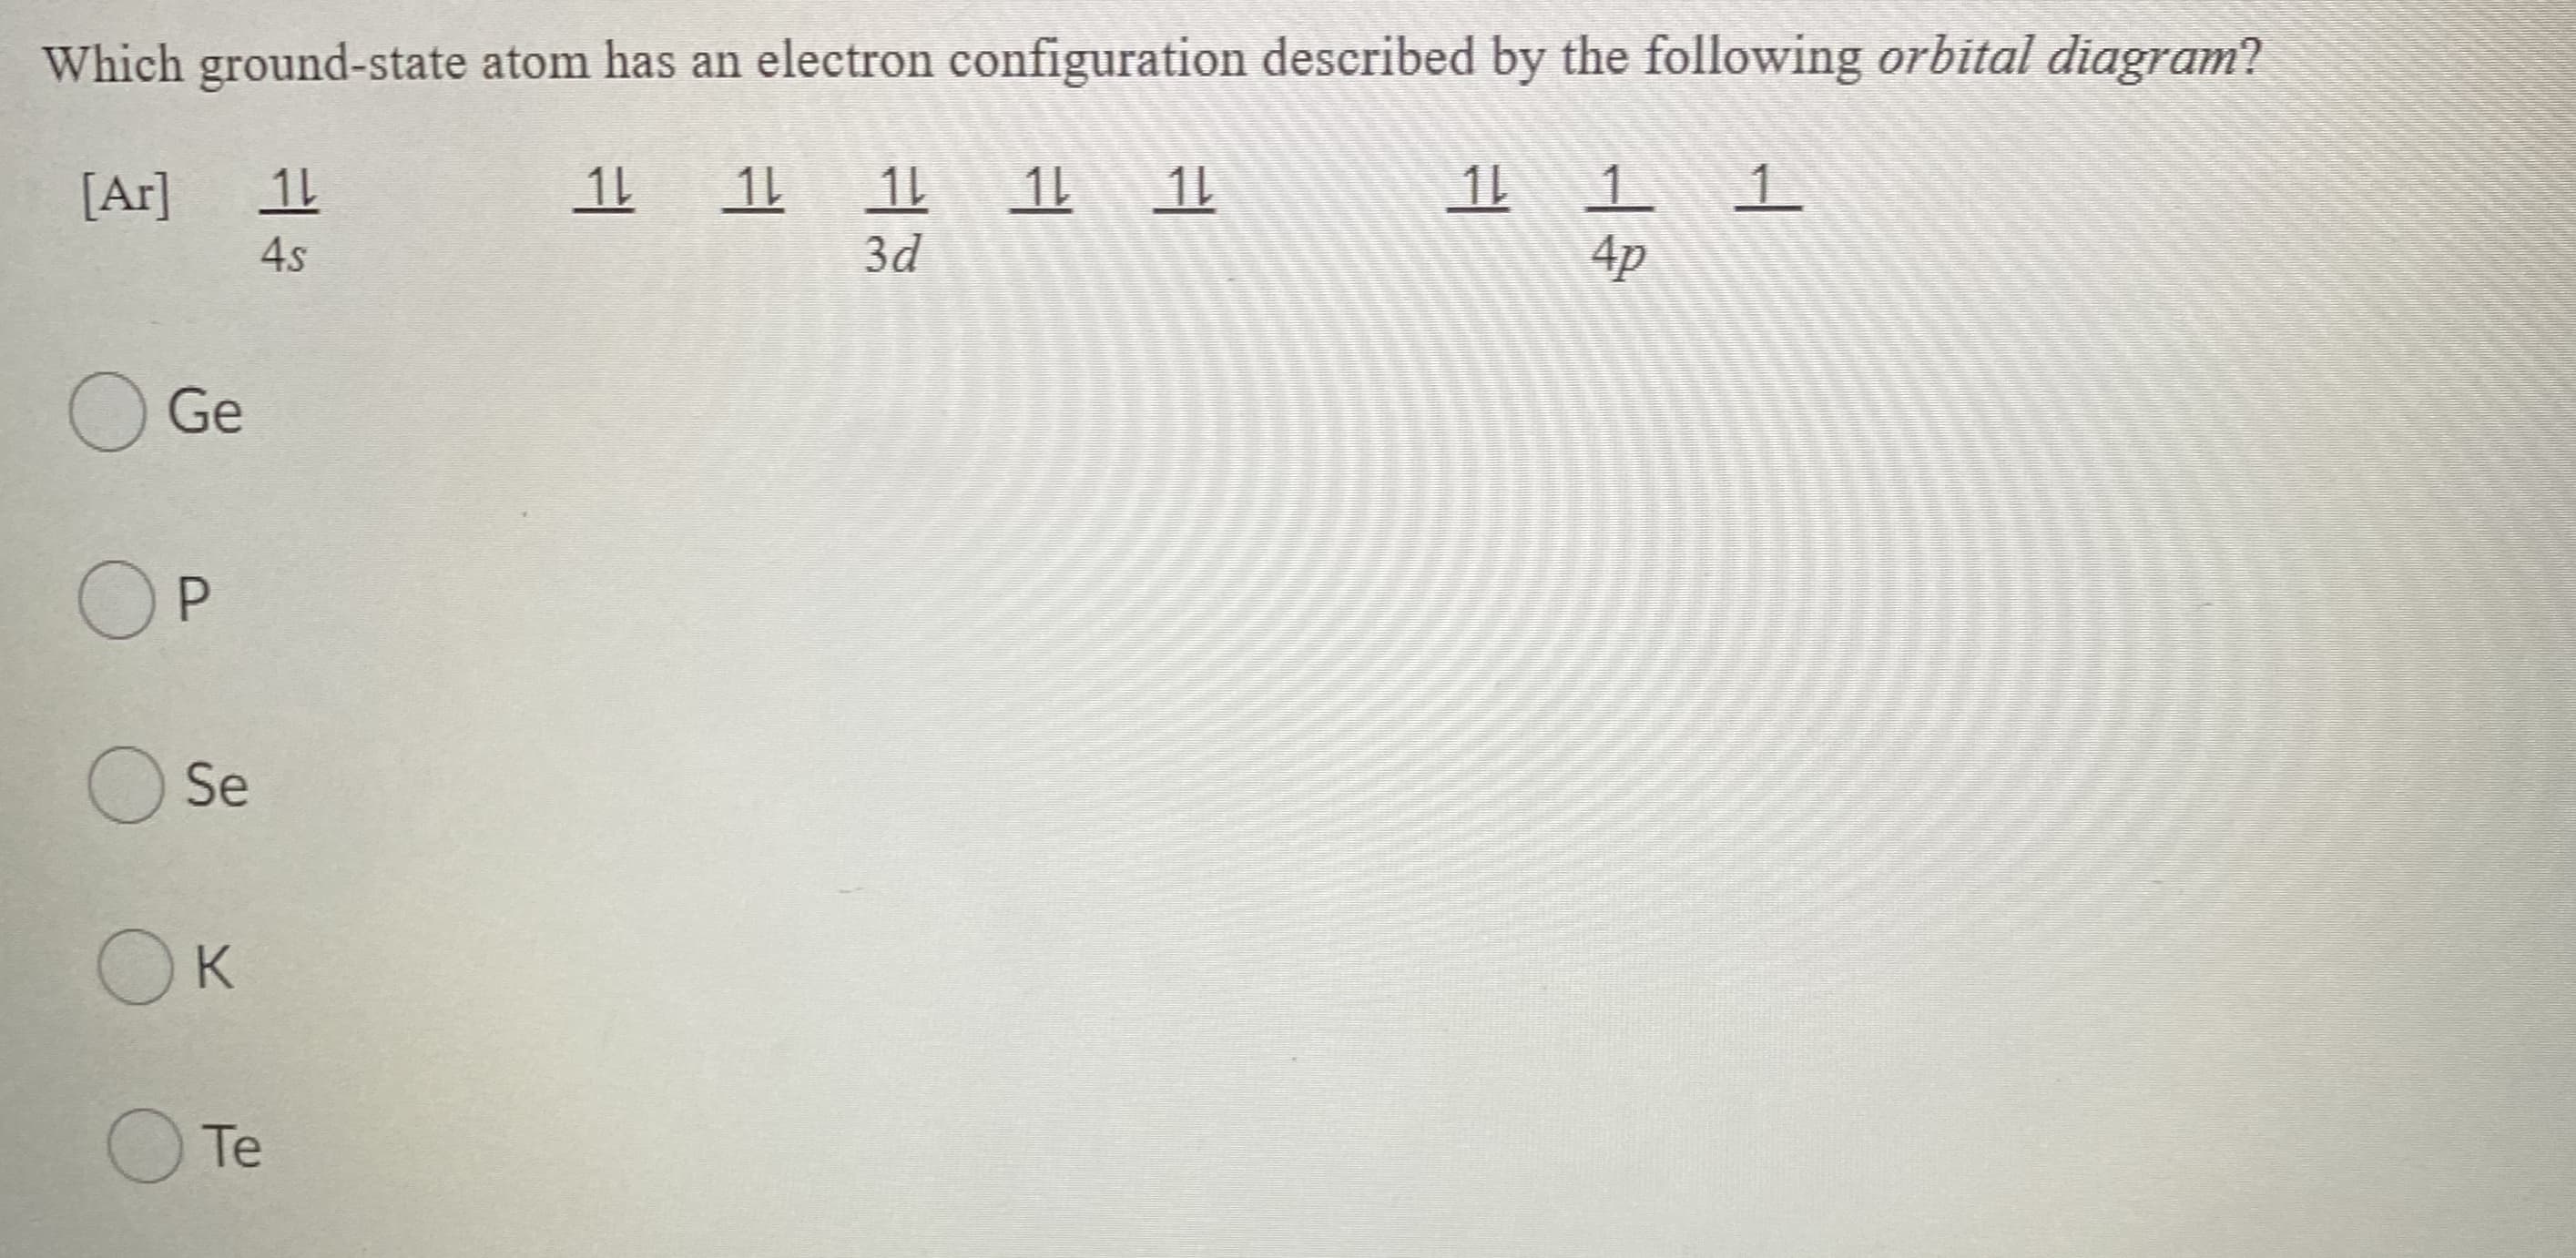 Which ground-state atom has an electron configuration described by the following orbital diagram?
1L 1 11 11 11
11 1 1
4p
[Ar]
4s
3d
O Ge
OP
Se
OK
Te
